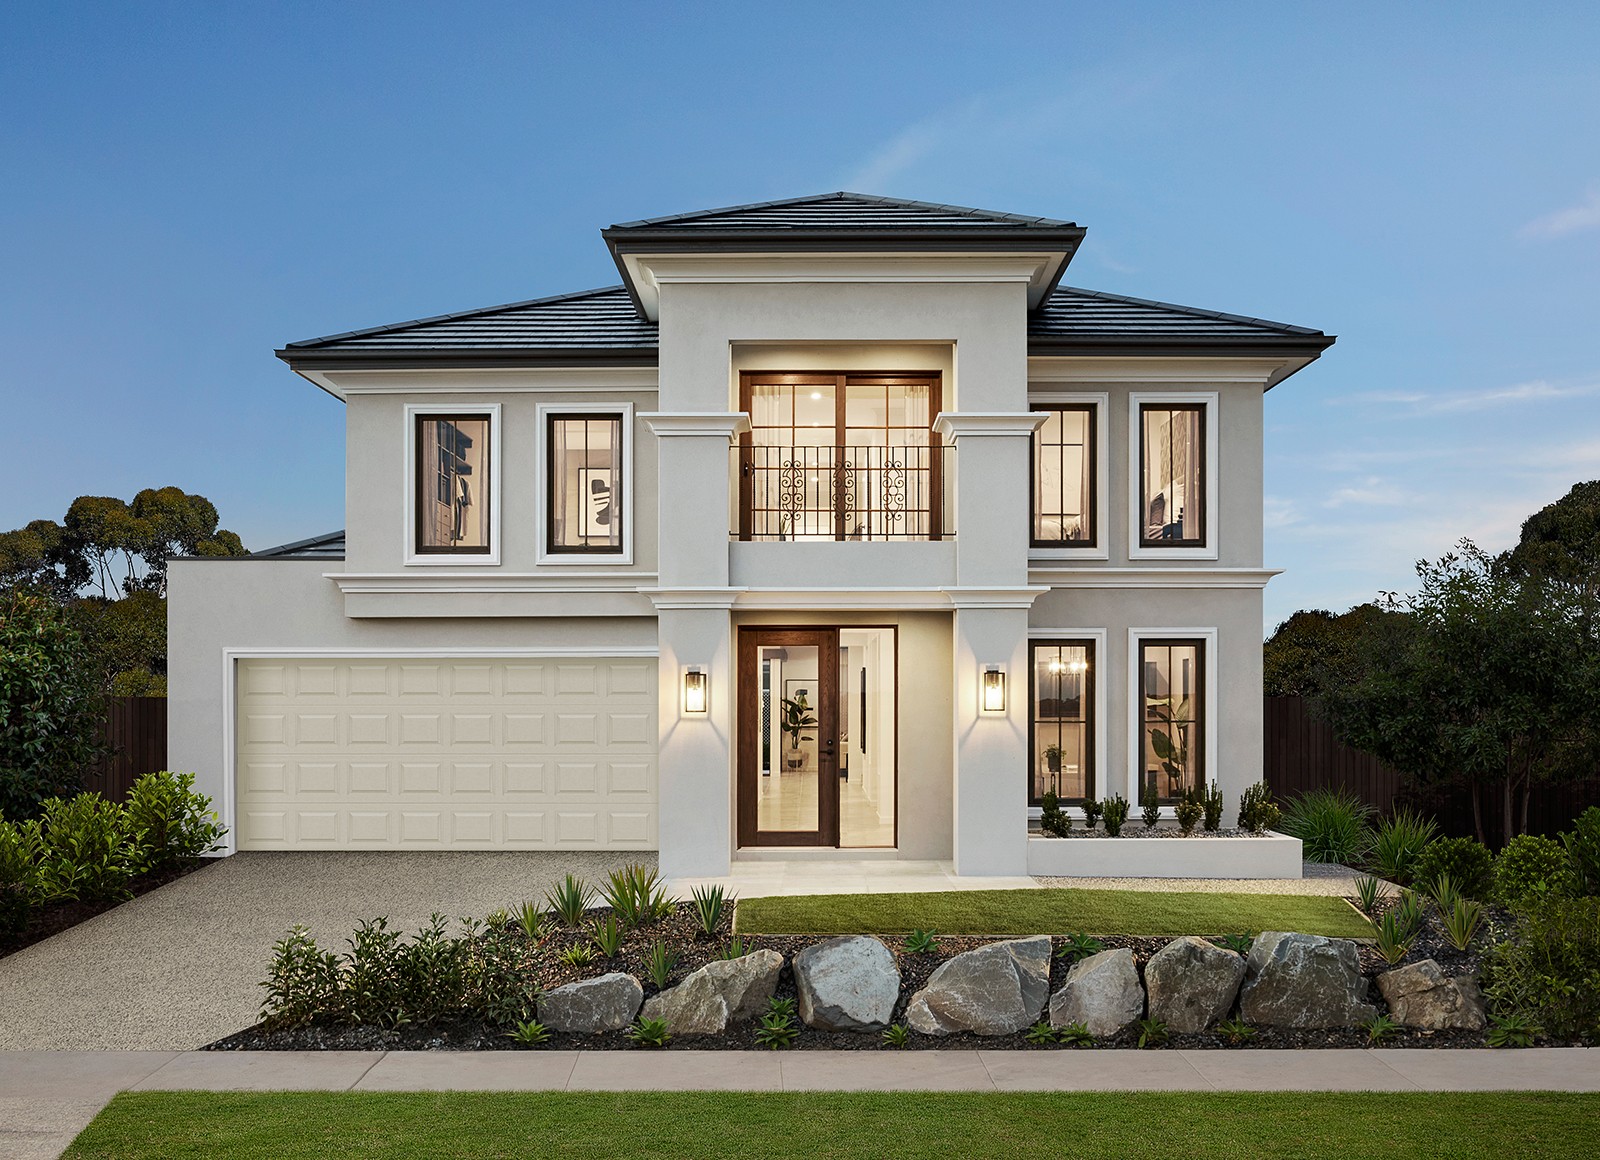 Enhance-Your-Exterior-with-a-Gorgeous-Garage-Door-carlisle-homes-body1__Resampled.jpg